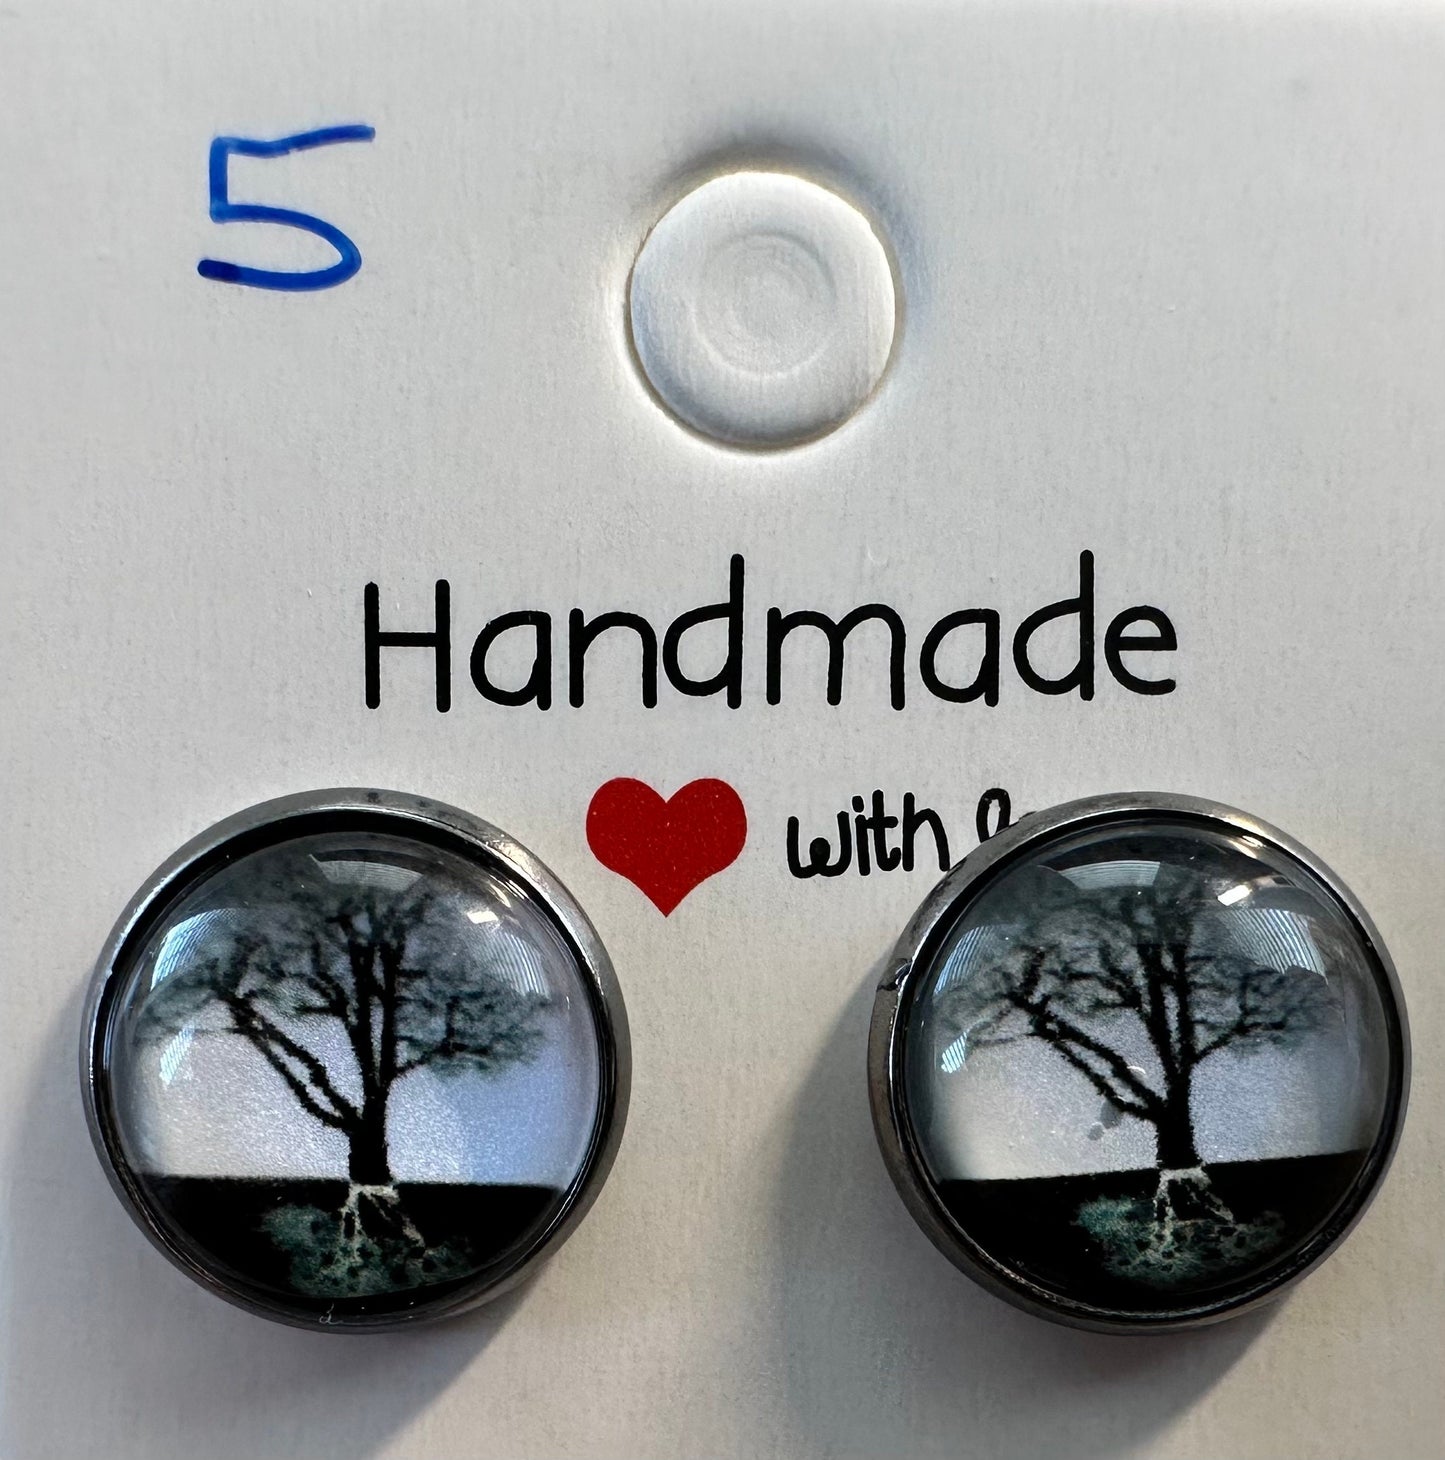 12M Black and White Tree Scene Stud earrings, great guy or girl gifts, unique, Silver stainless steel won't tarnish, hypoallergenic, unique